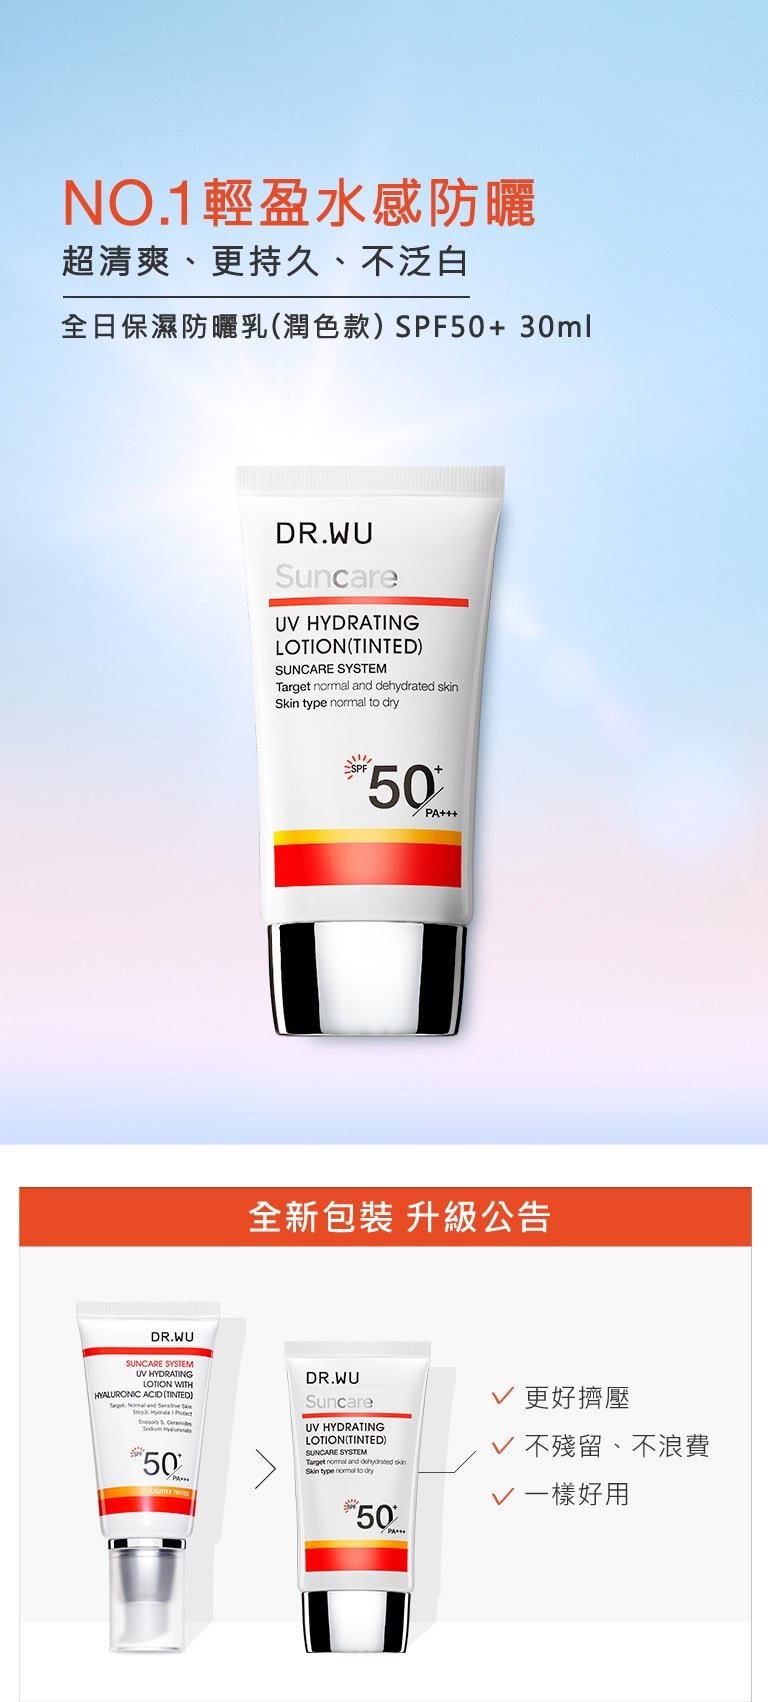 Dr.Wu UV Lotion Hyaluronic - Intro